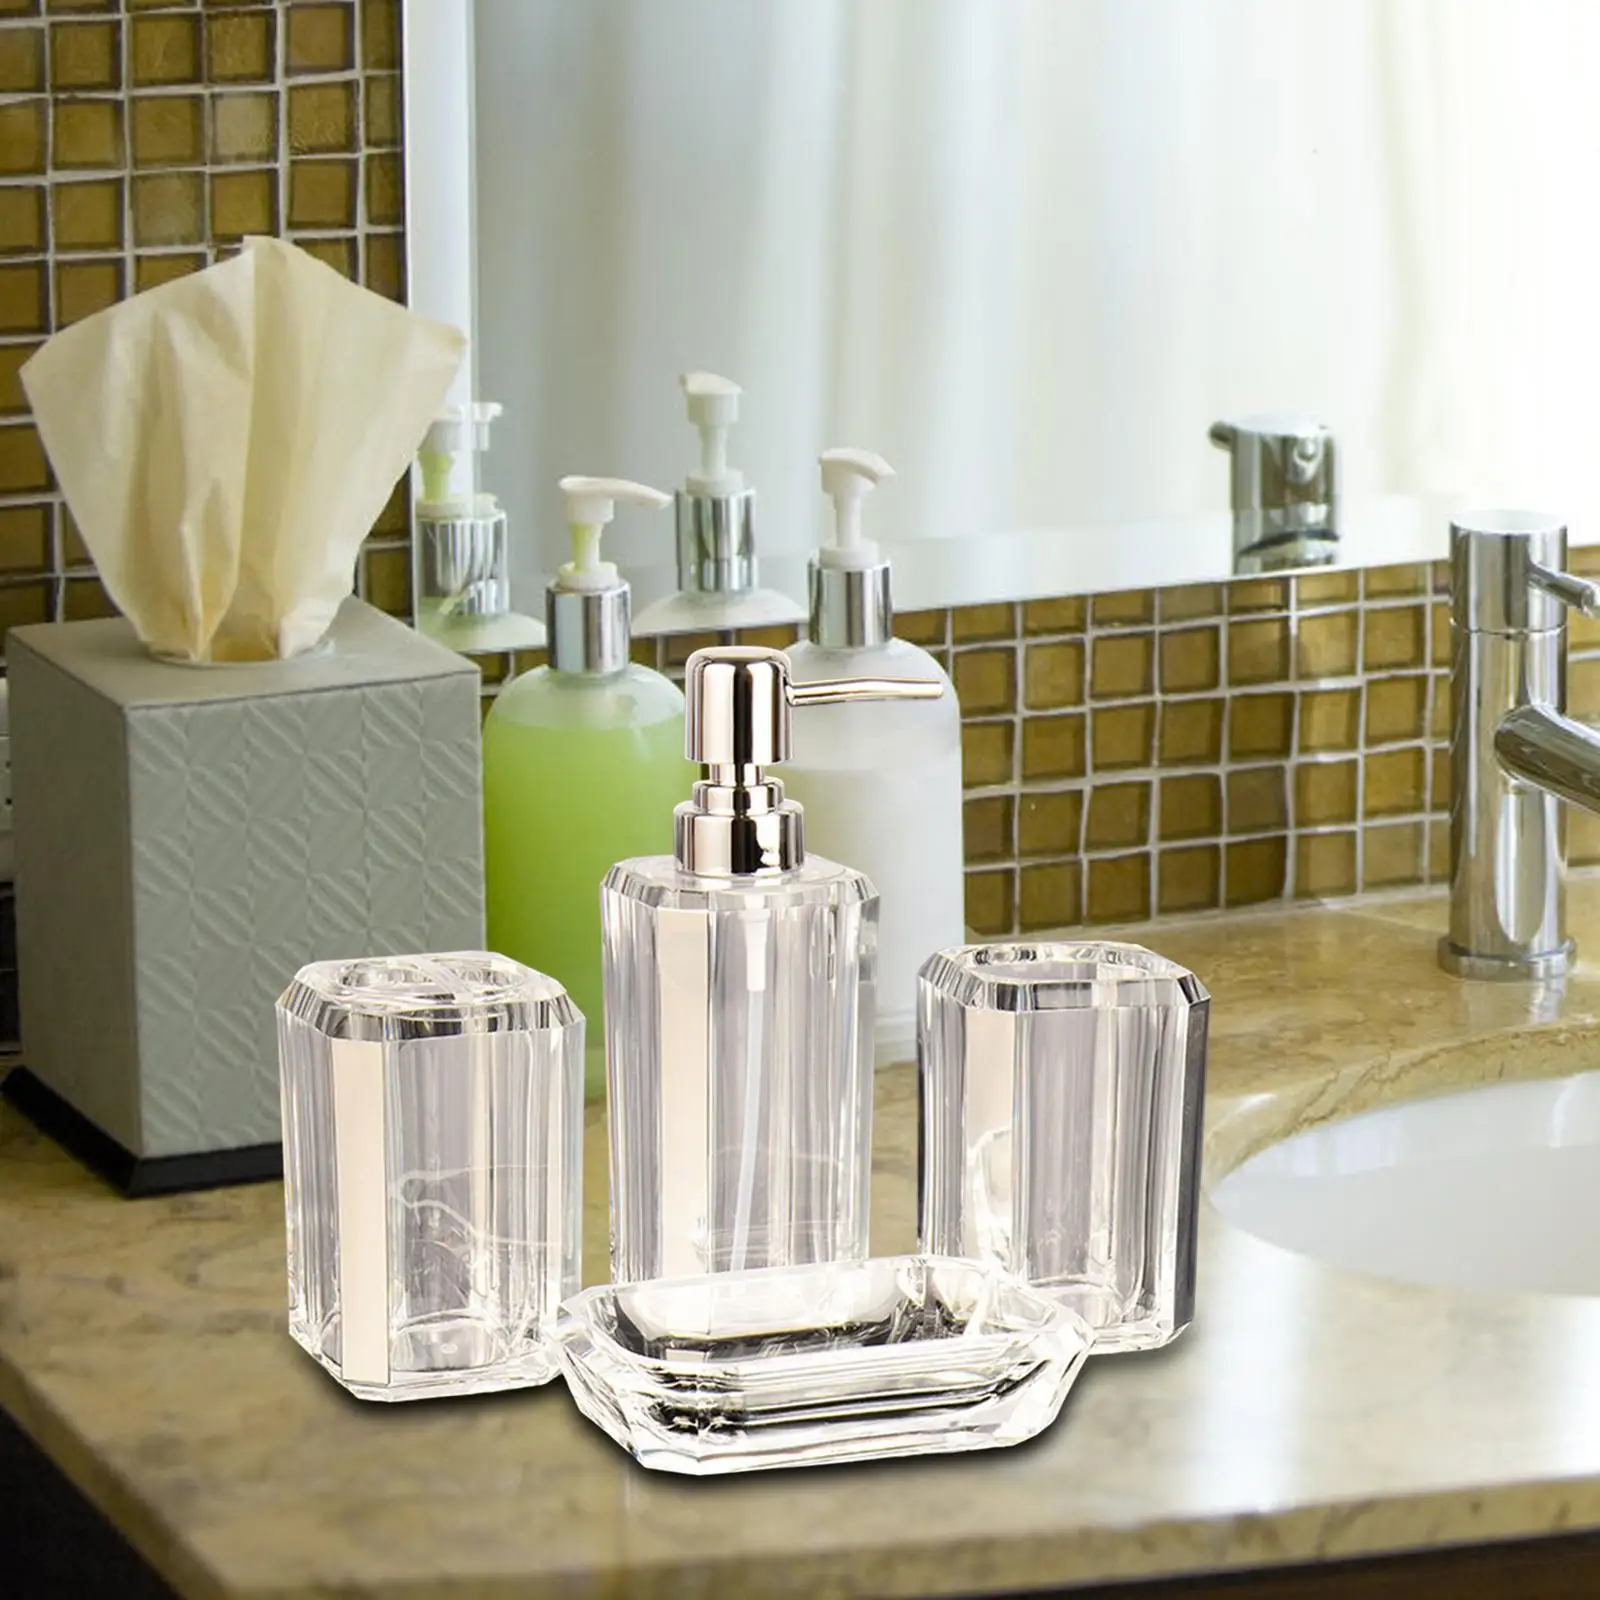 4Pcs Bath Accessory Vanity Accessory Set Clear Toilet Accessories Set Toothbrush Holder Soap Dispenser for Household Decoration